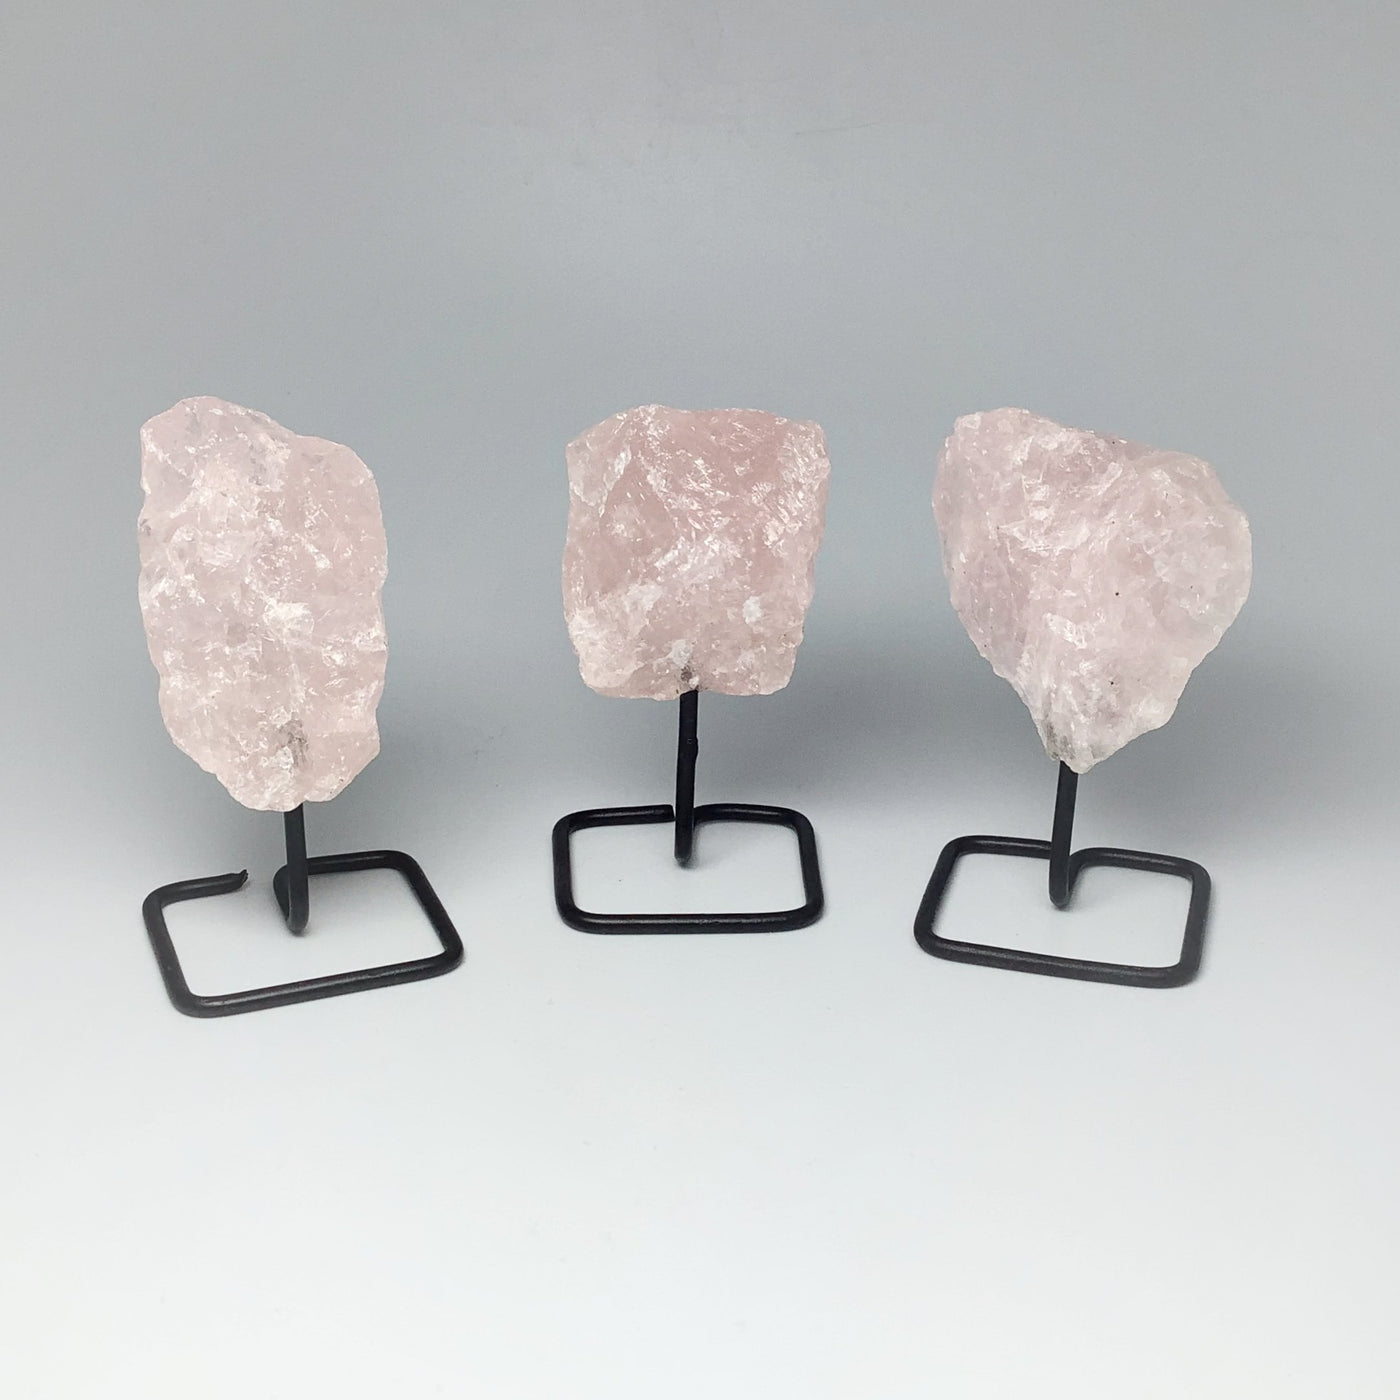 Rough Rose Quartz on Stand at $25 Each